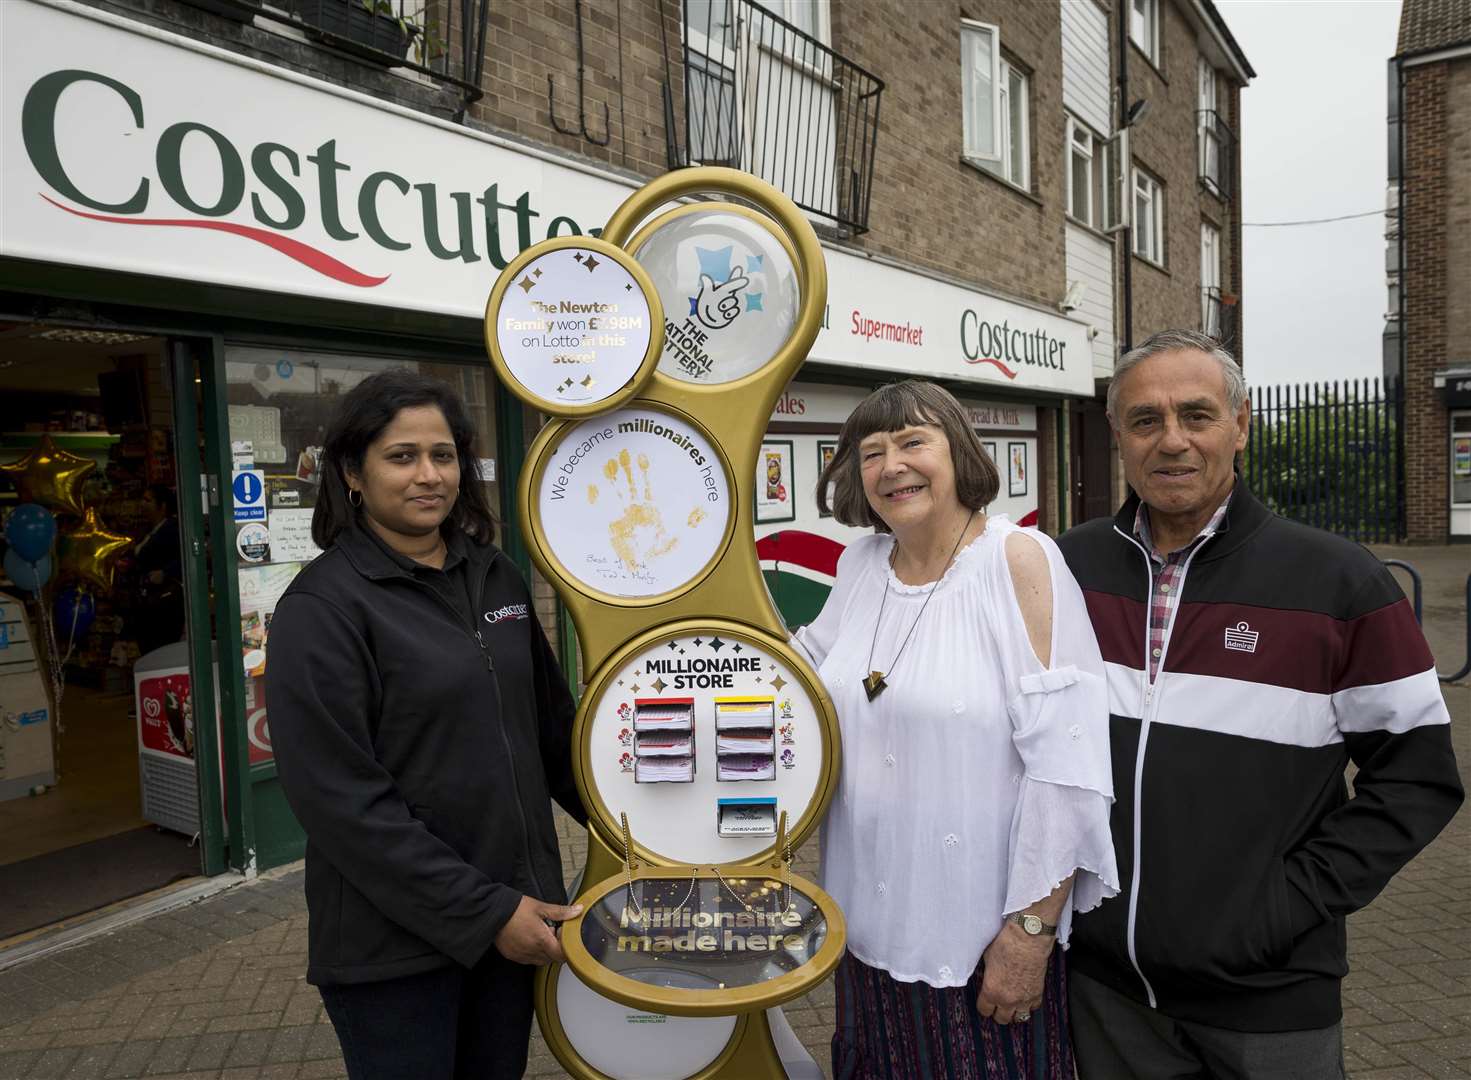 Ted and Marilyn Newton (right) with shopkeeper Sujatha Susantha (left).